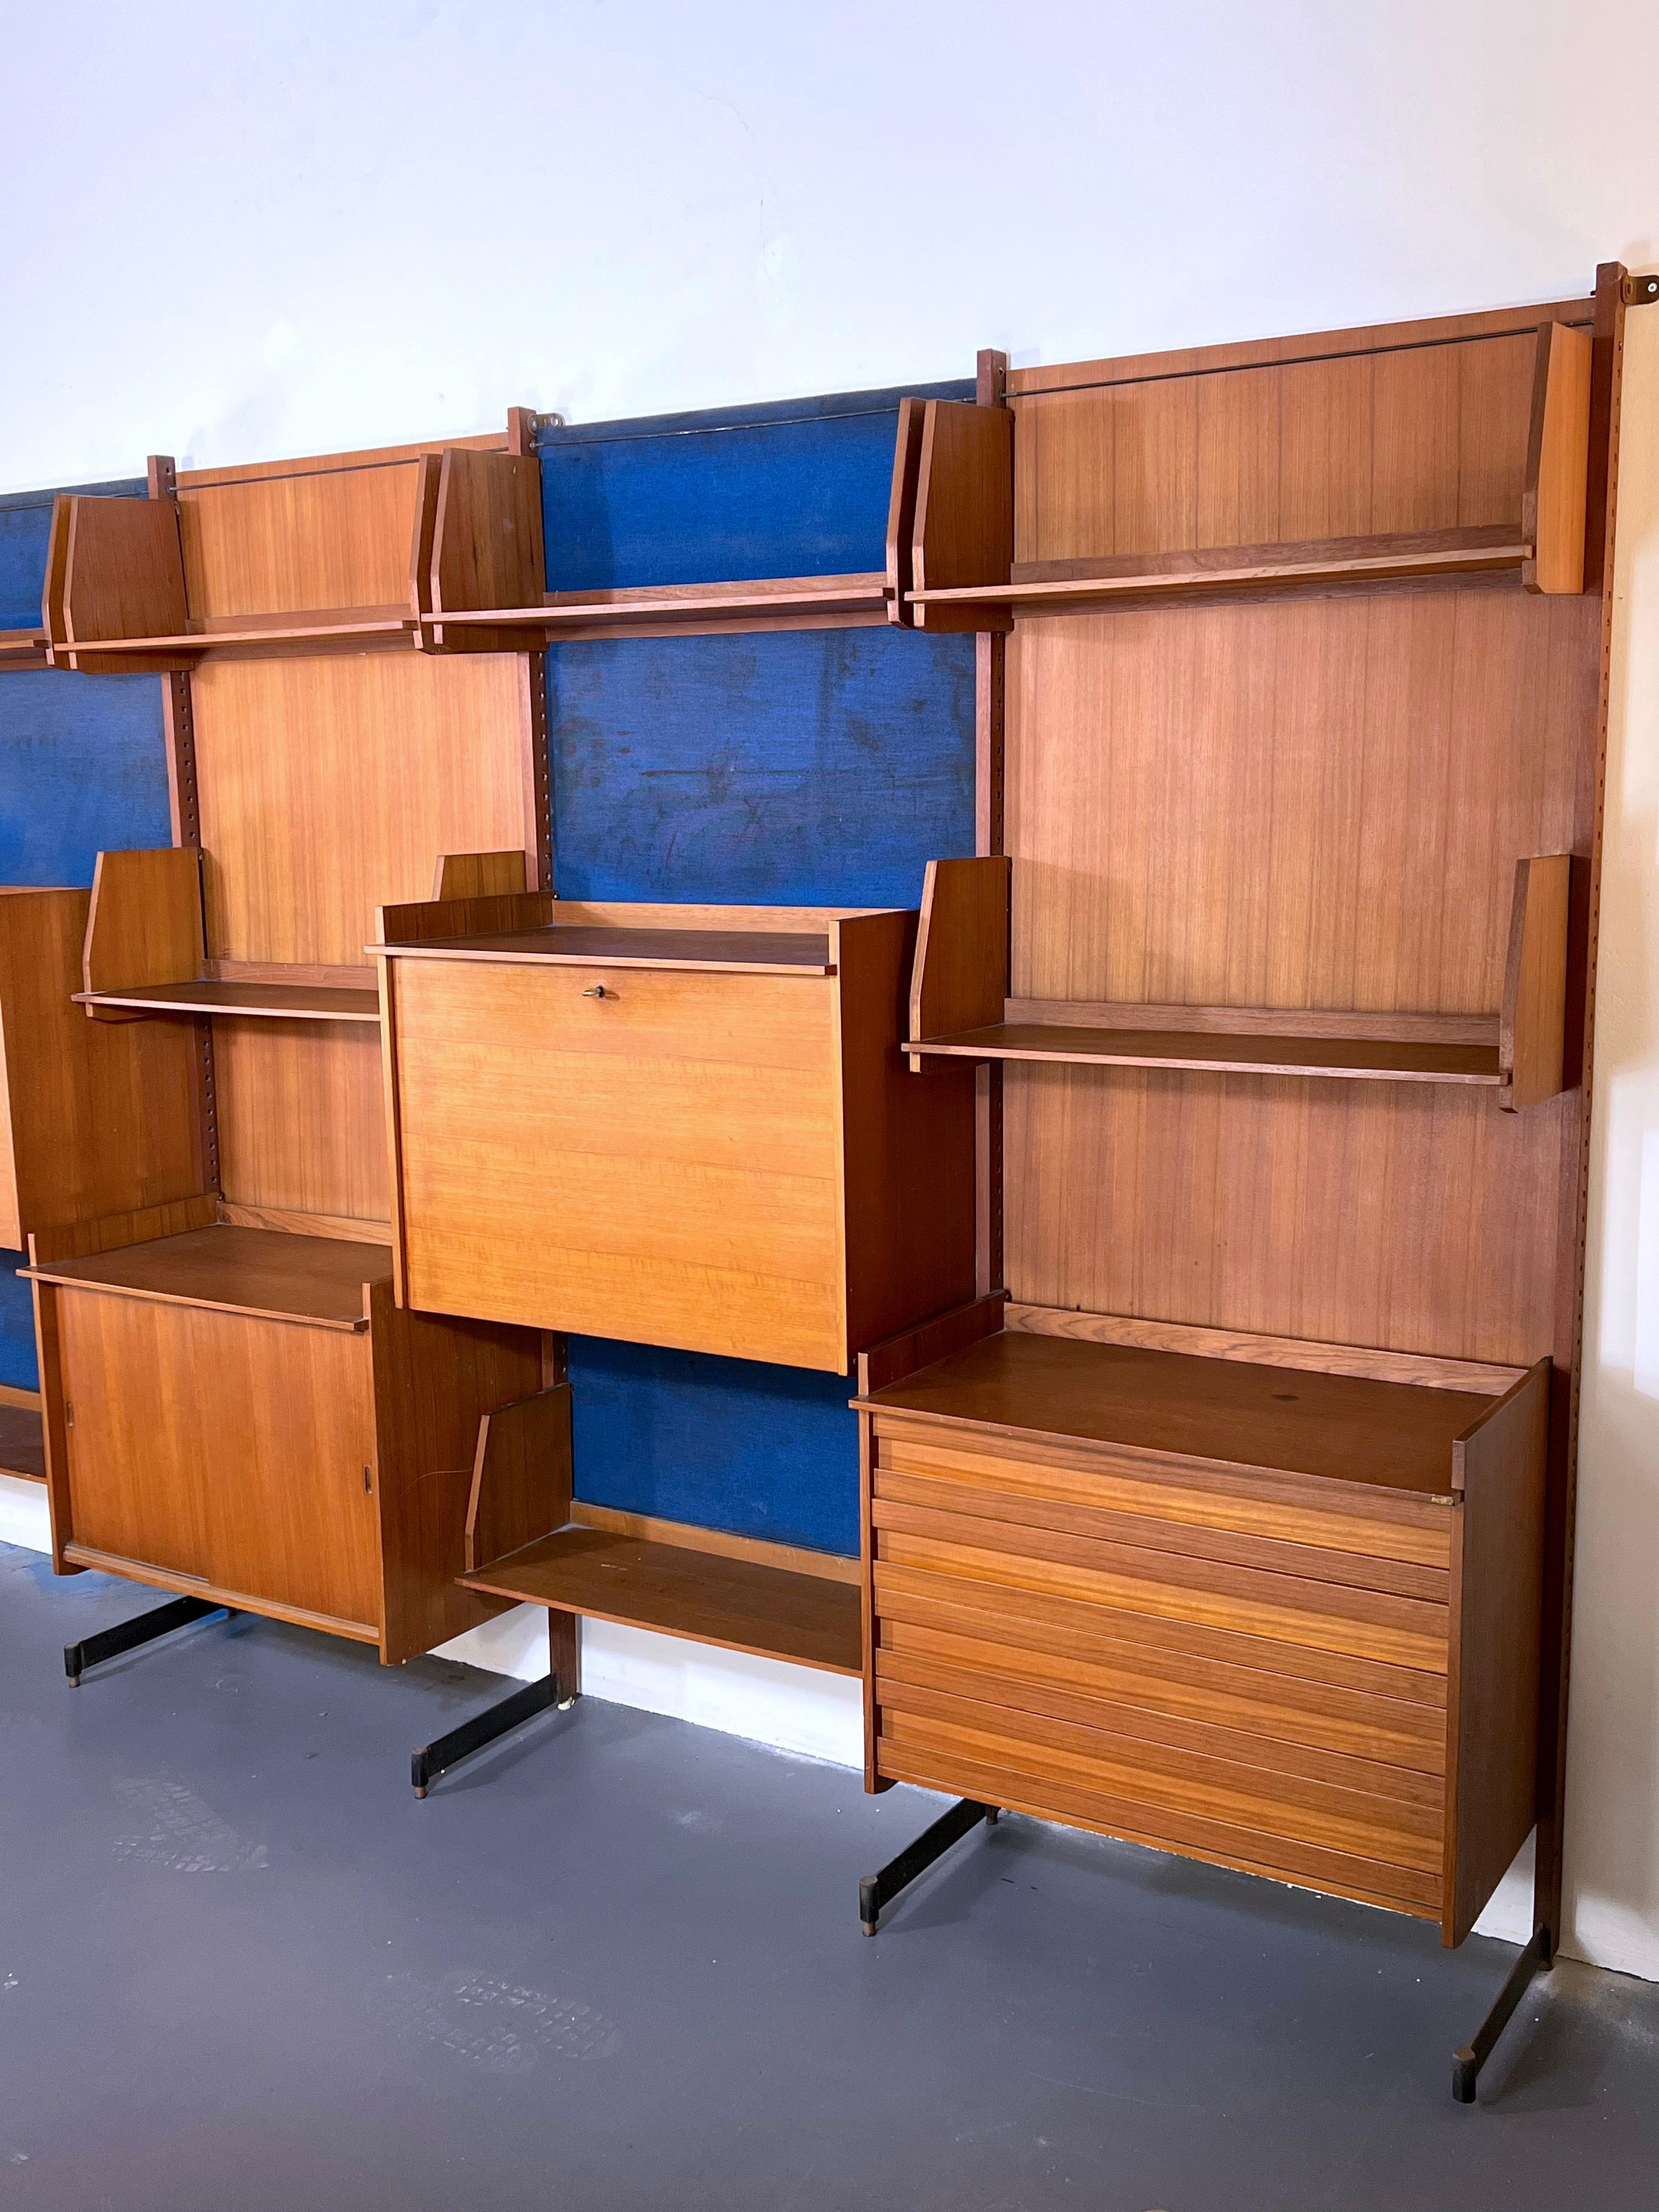 20th Century Mid-Century Modern Modular Wood Bookcase from 50s For Sale